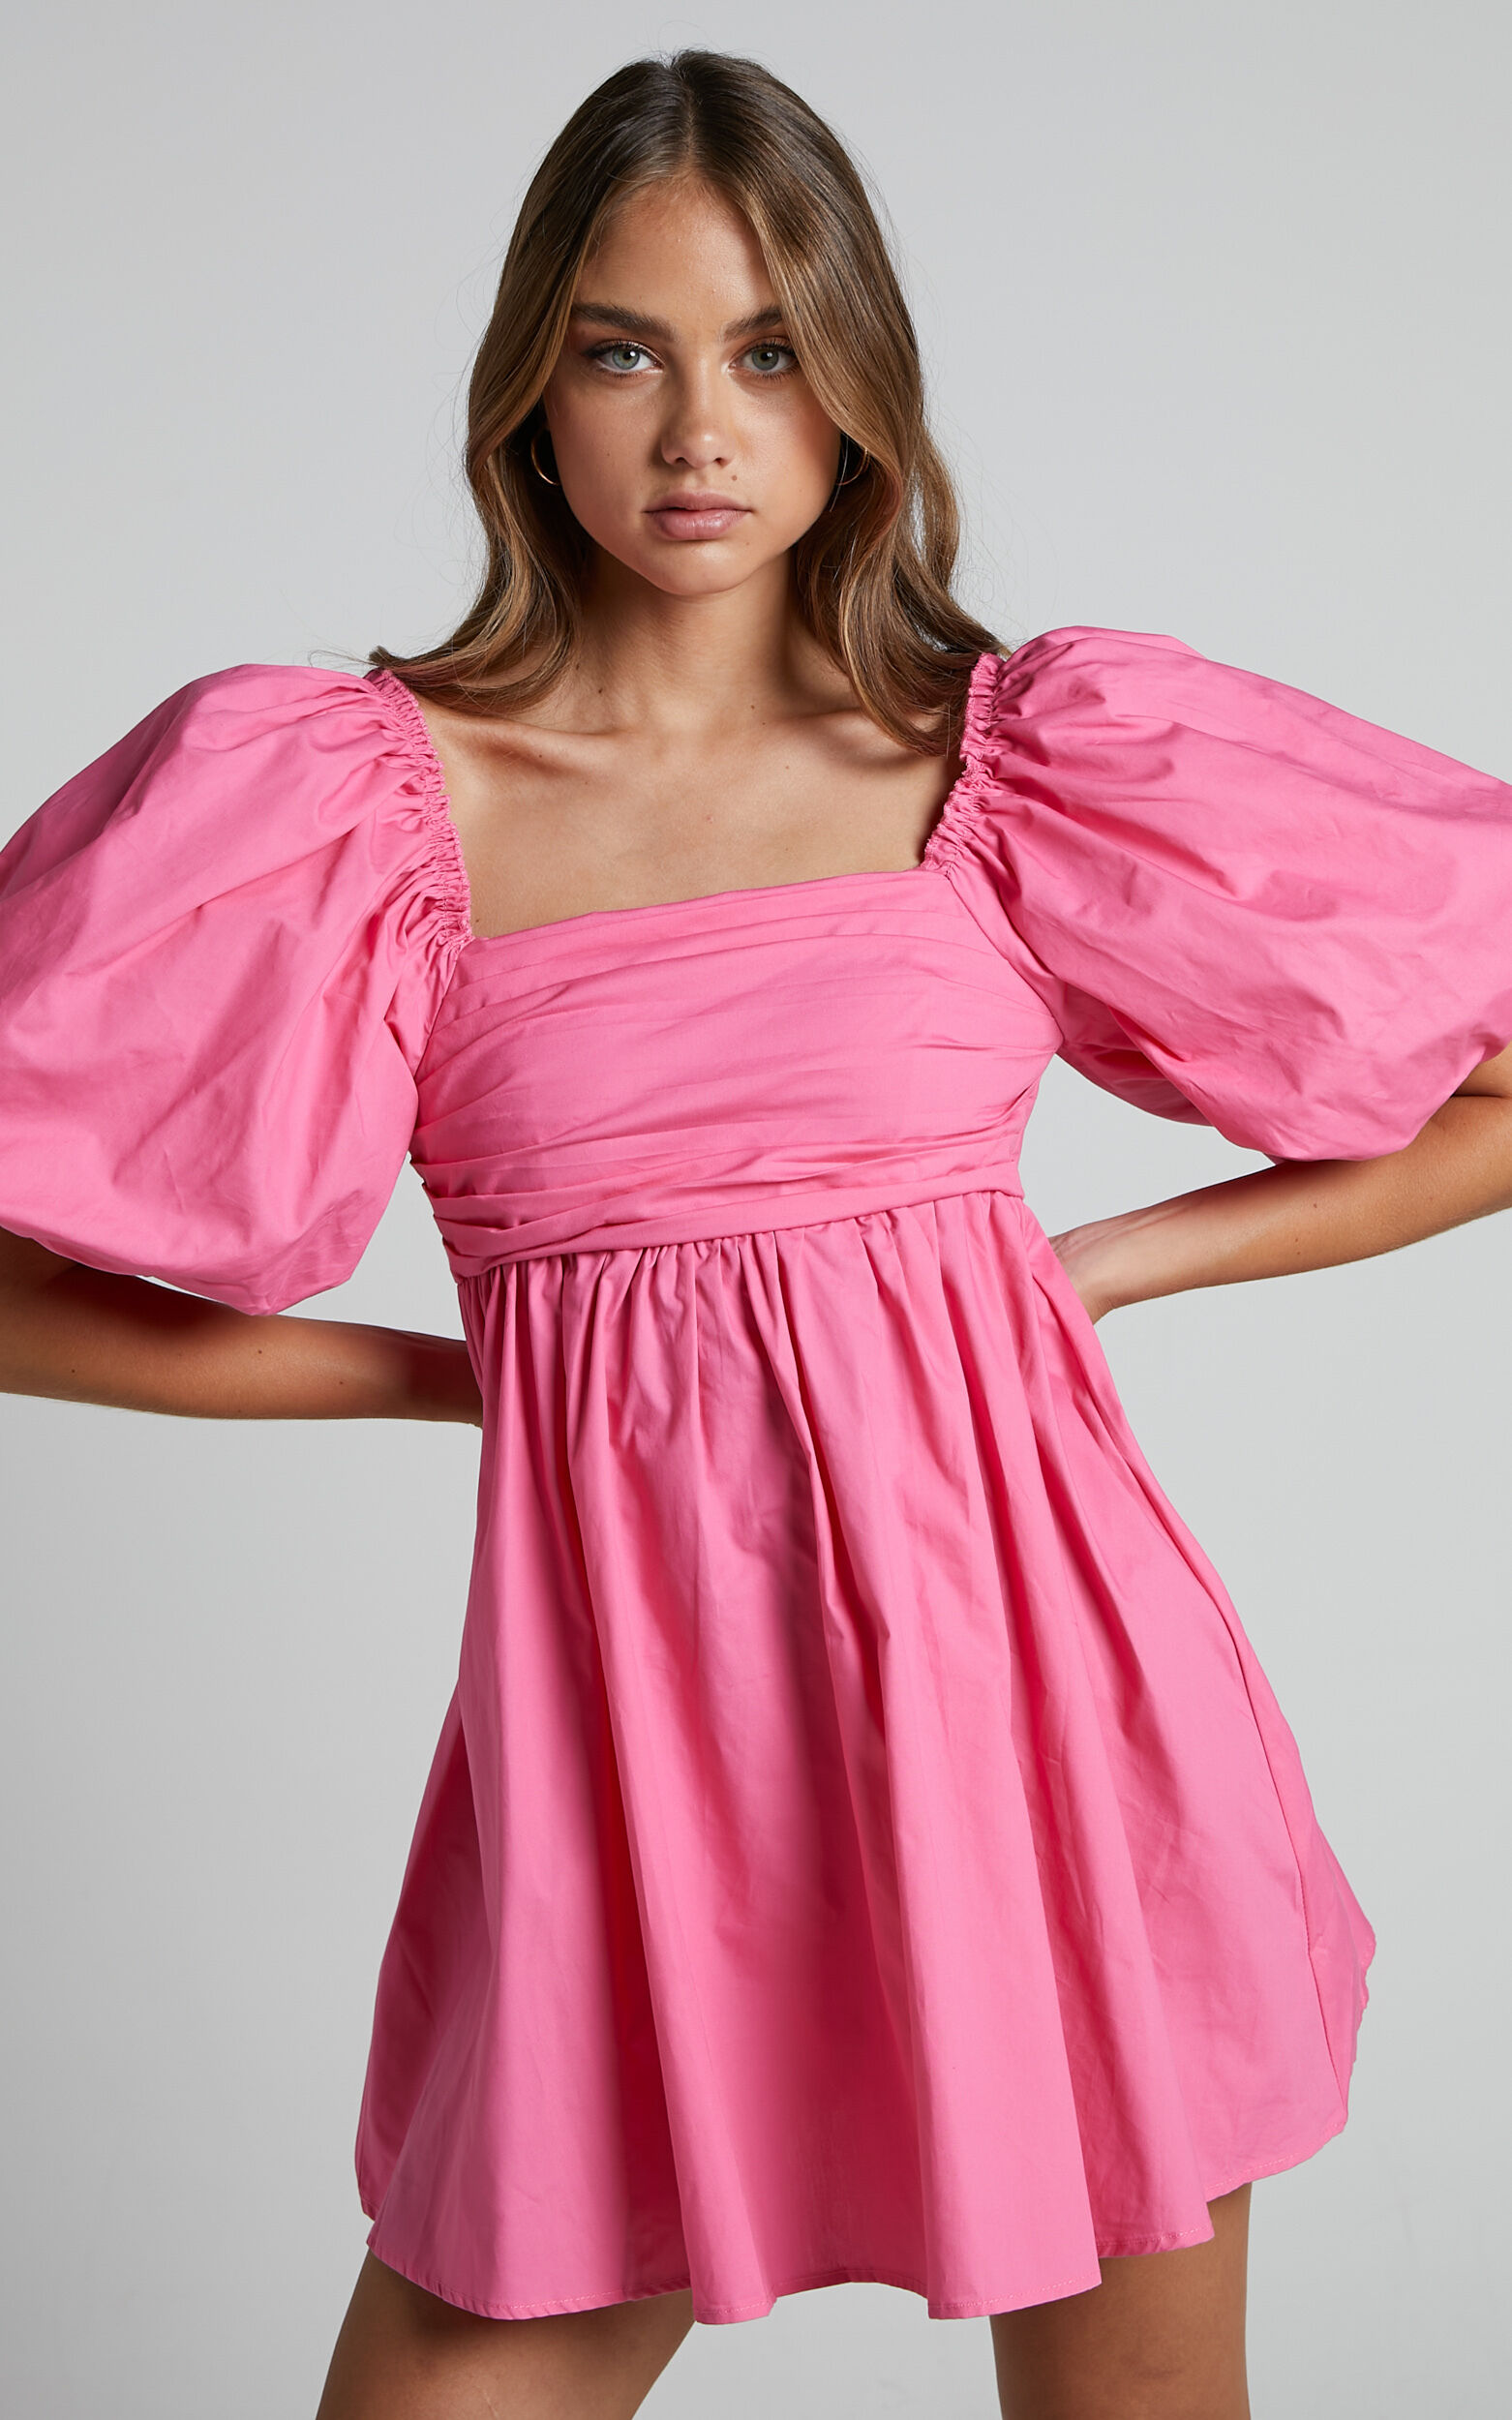 Melony Mini Dress - Cotton Poplin Puff Sleeve Dress in Pink - 06, PNK1, super-hi-res image number null